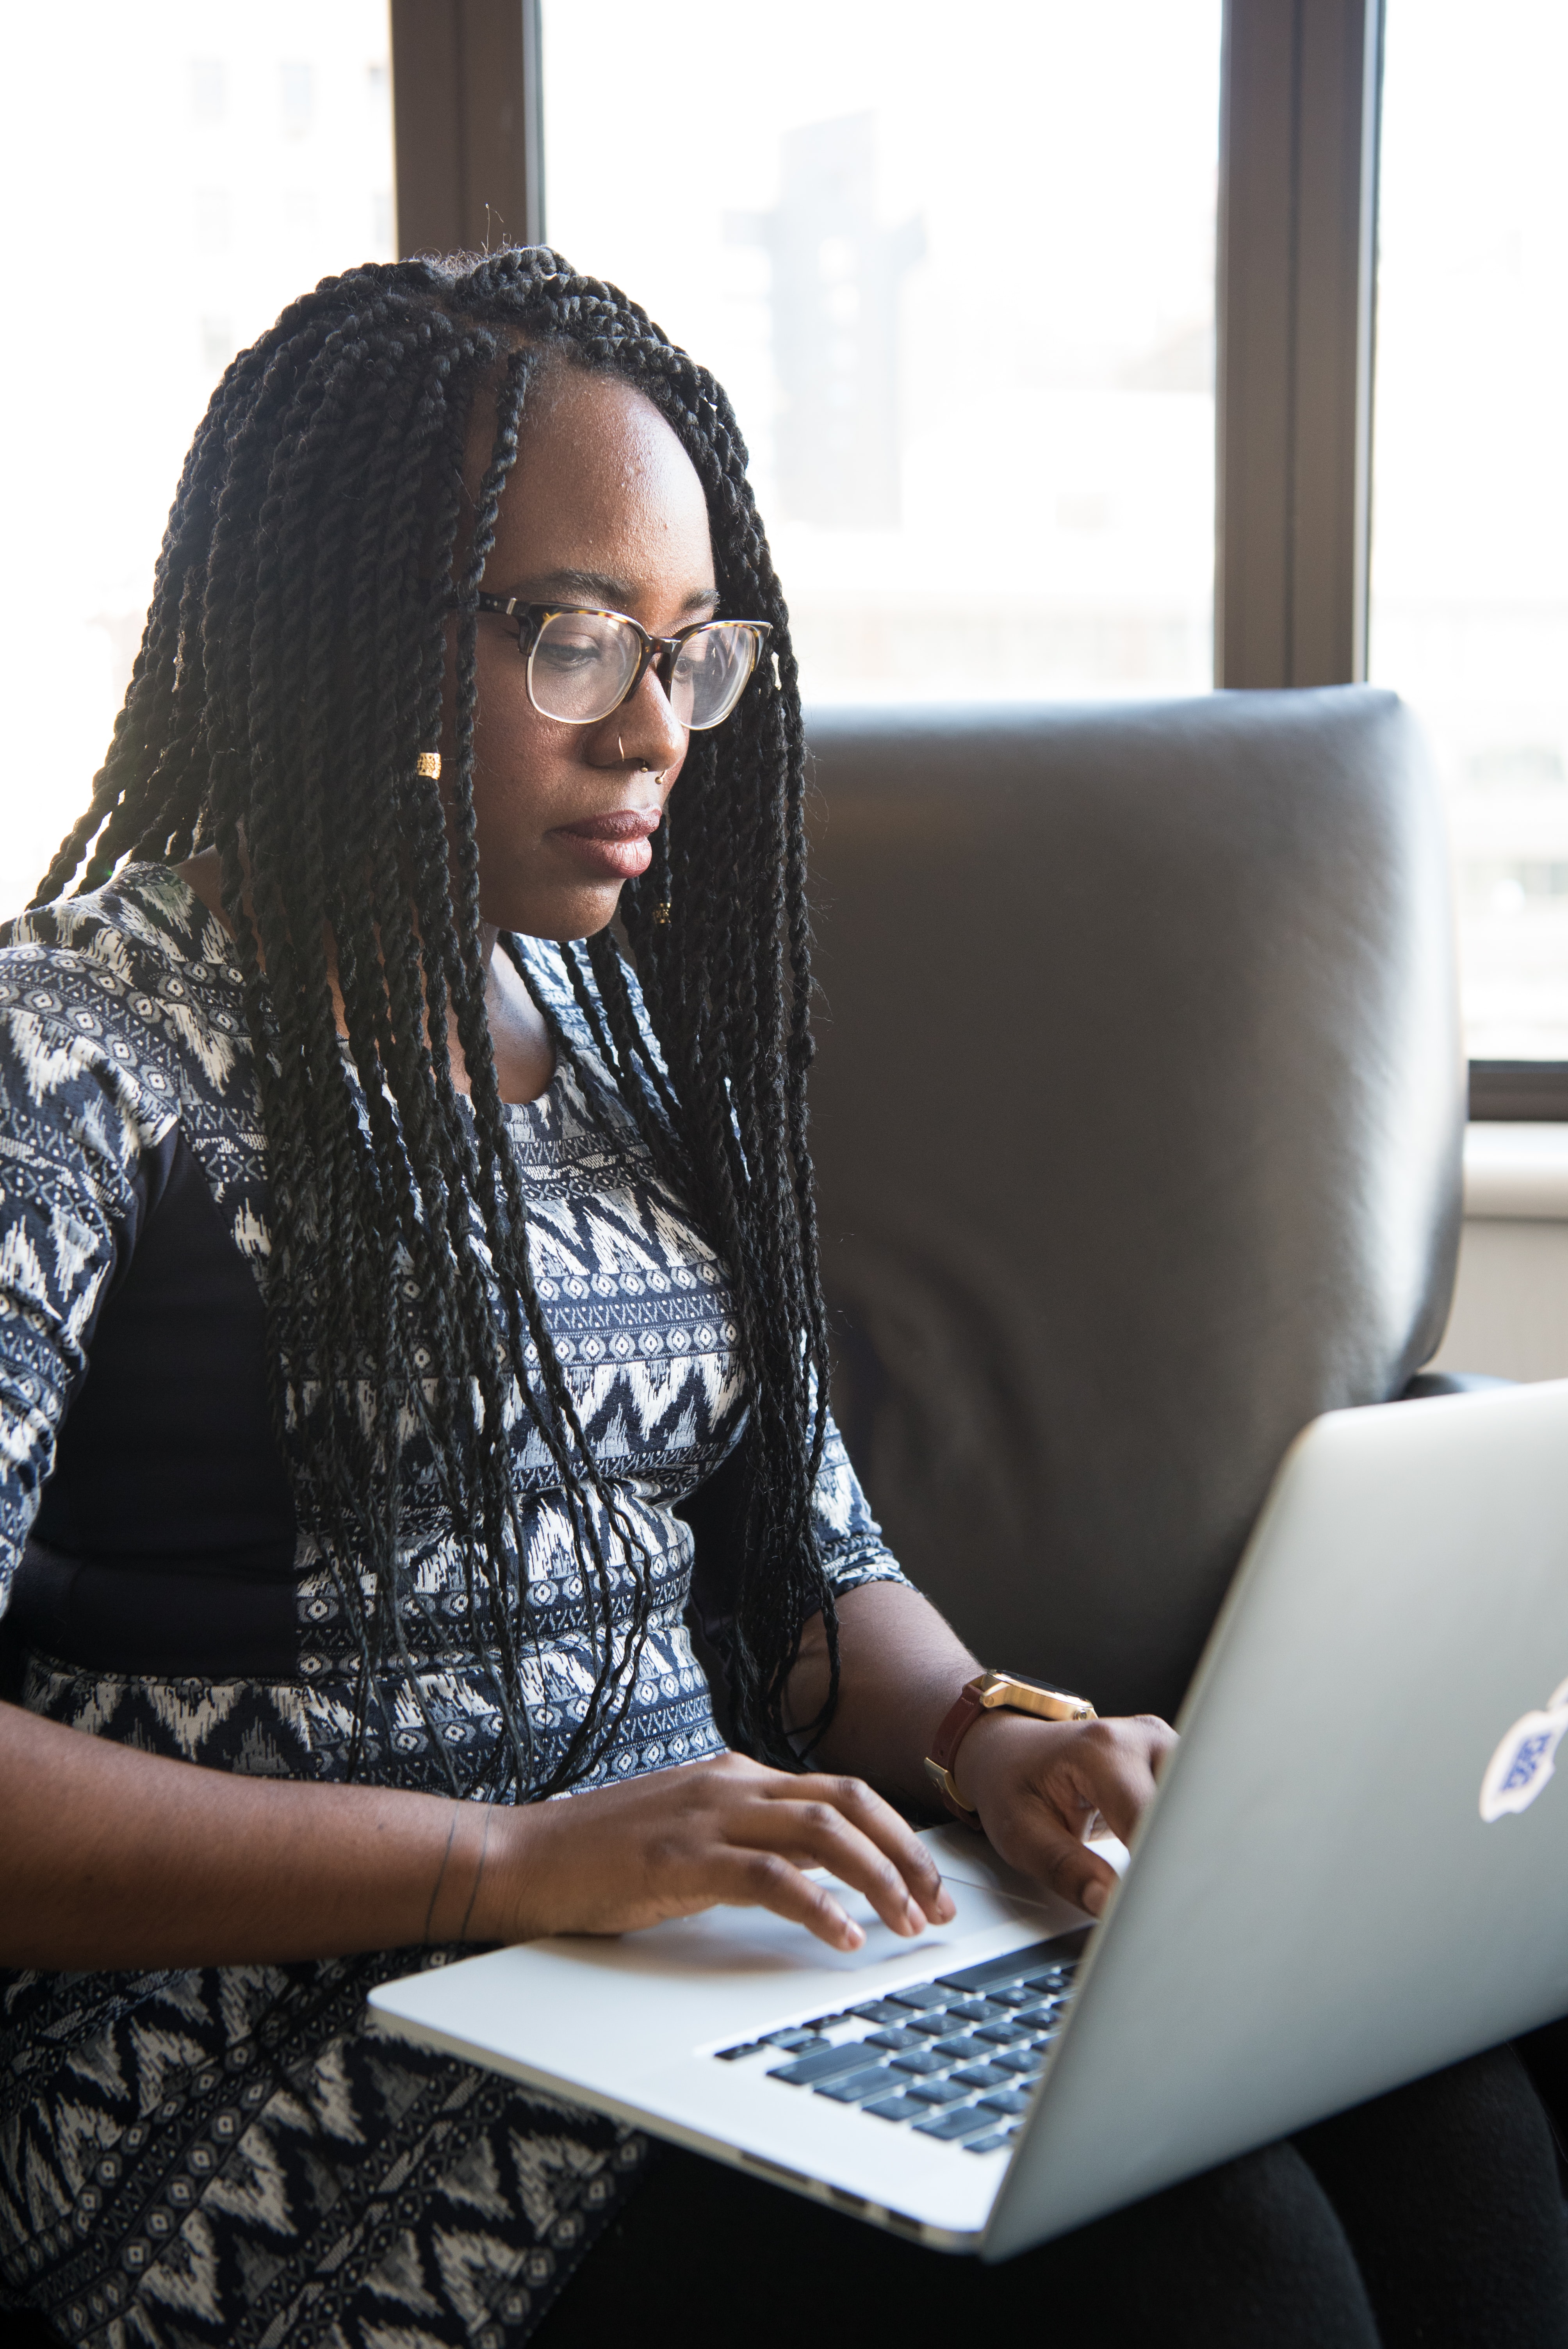 Black woman with glasses wearing a patterned dress on a chair with an open laptop on her lap